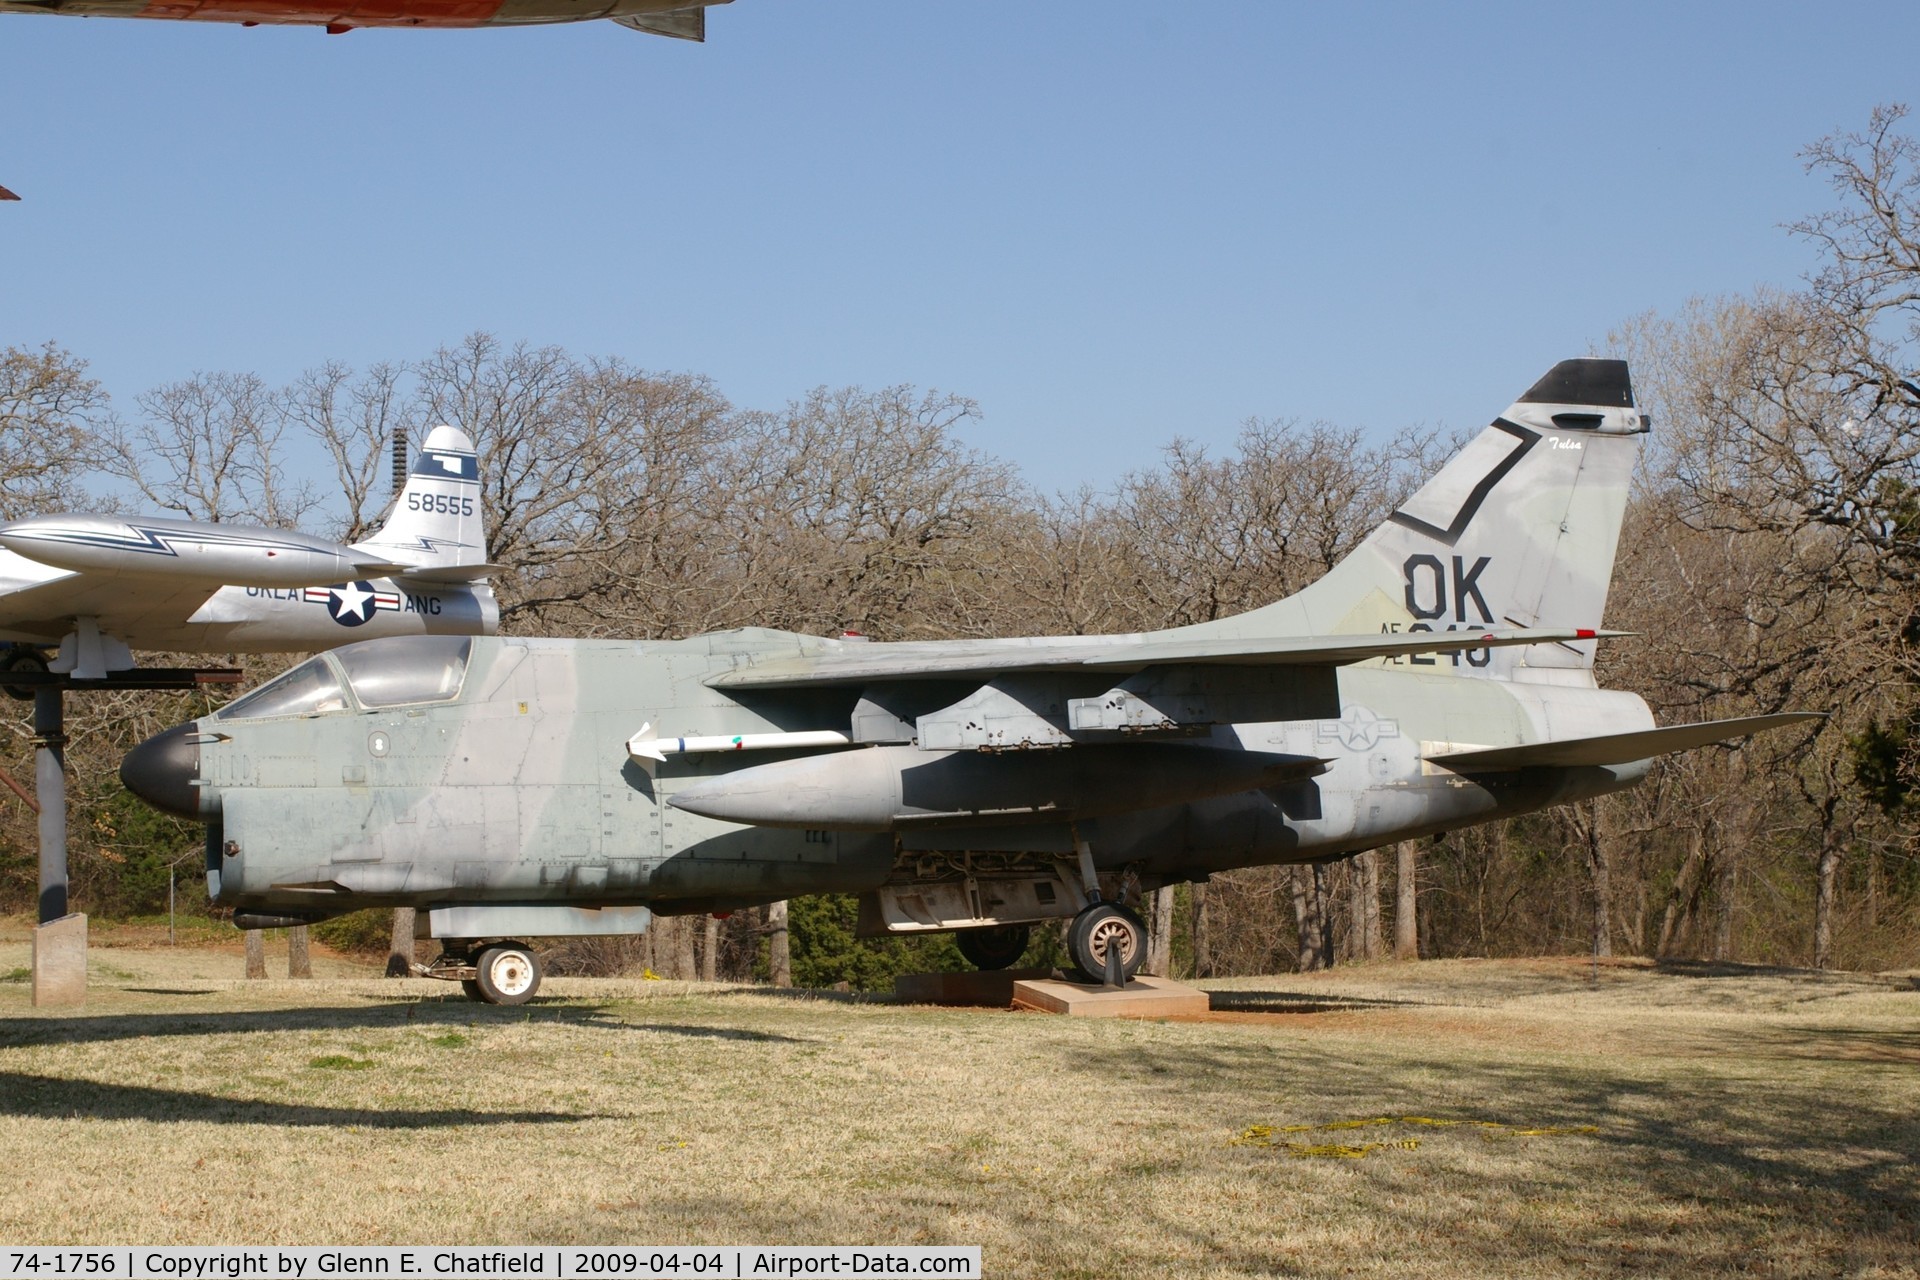 74-1756, 1974 LTV A-7D Corsair II C/N D-431, A much nicer shot 14 years later.  45th Infantry Division Museum, Oklahoma City